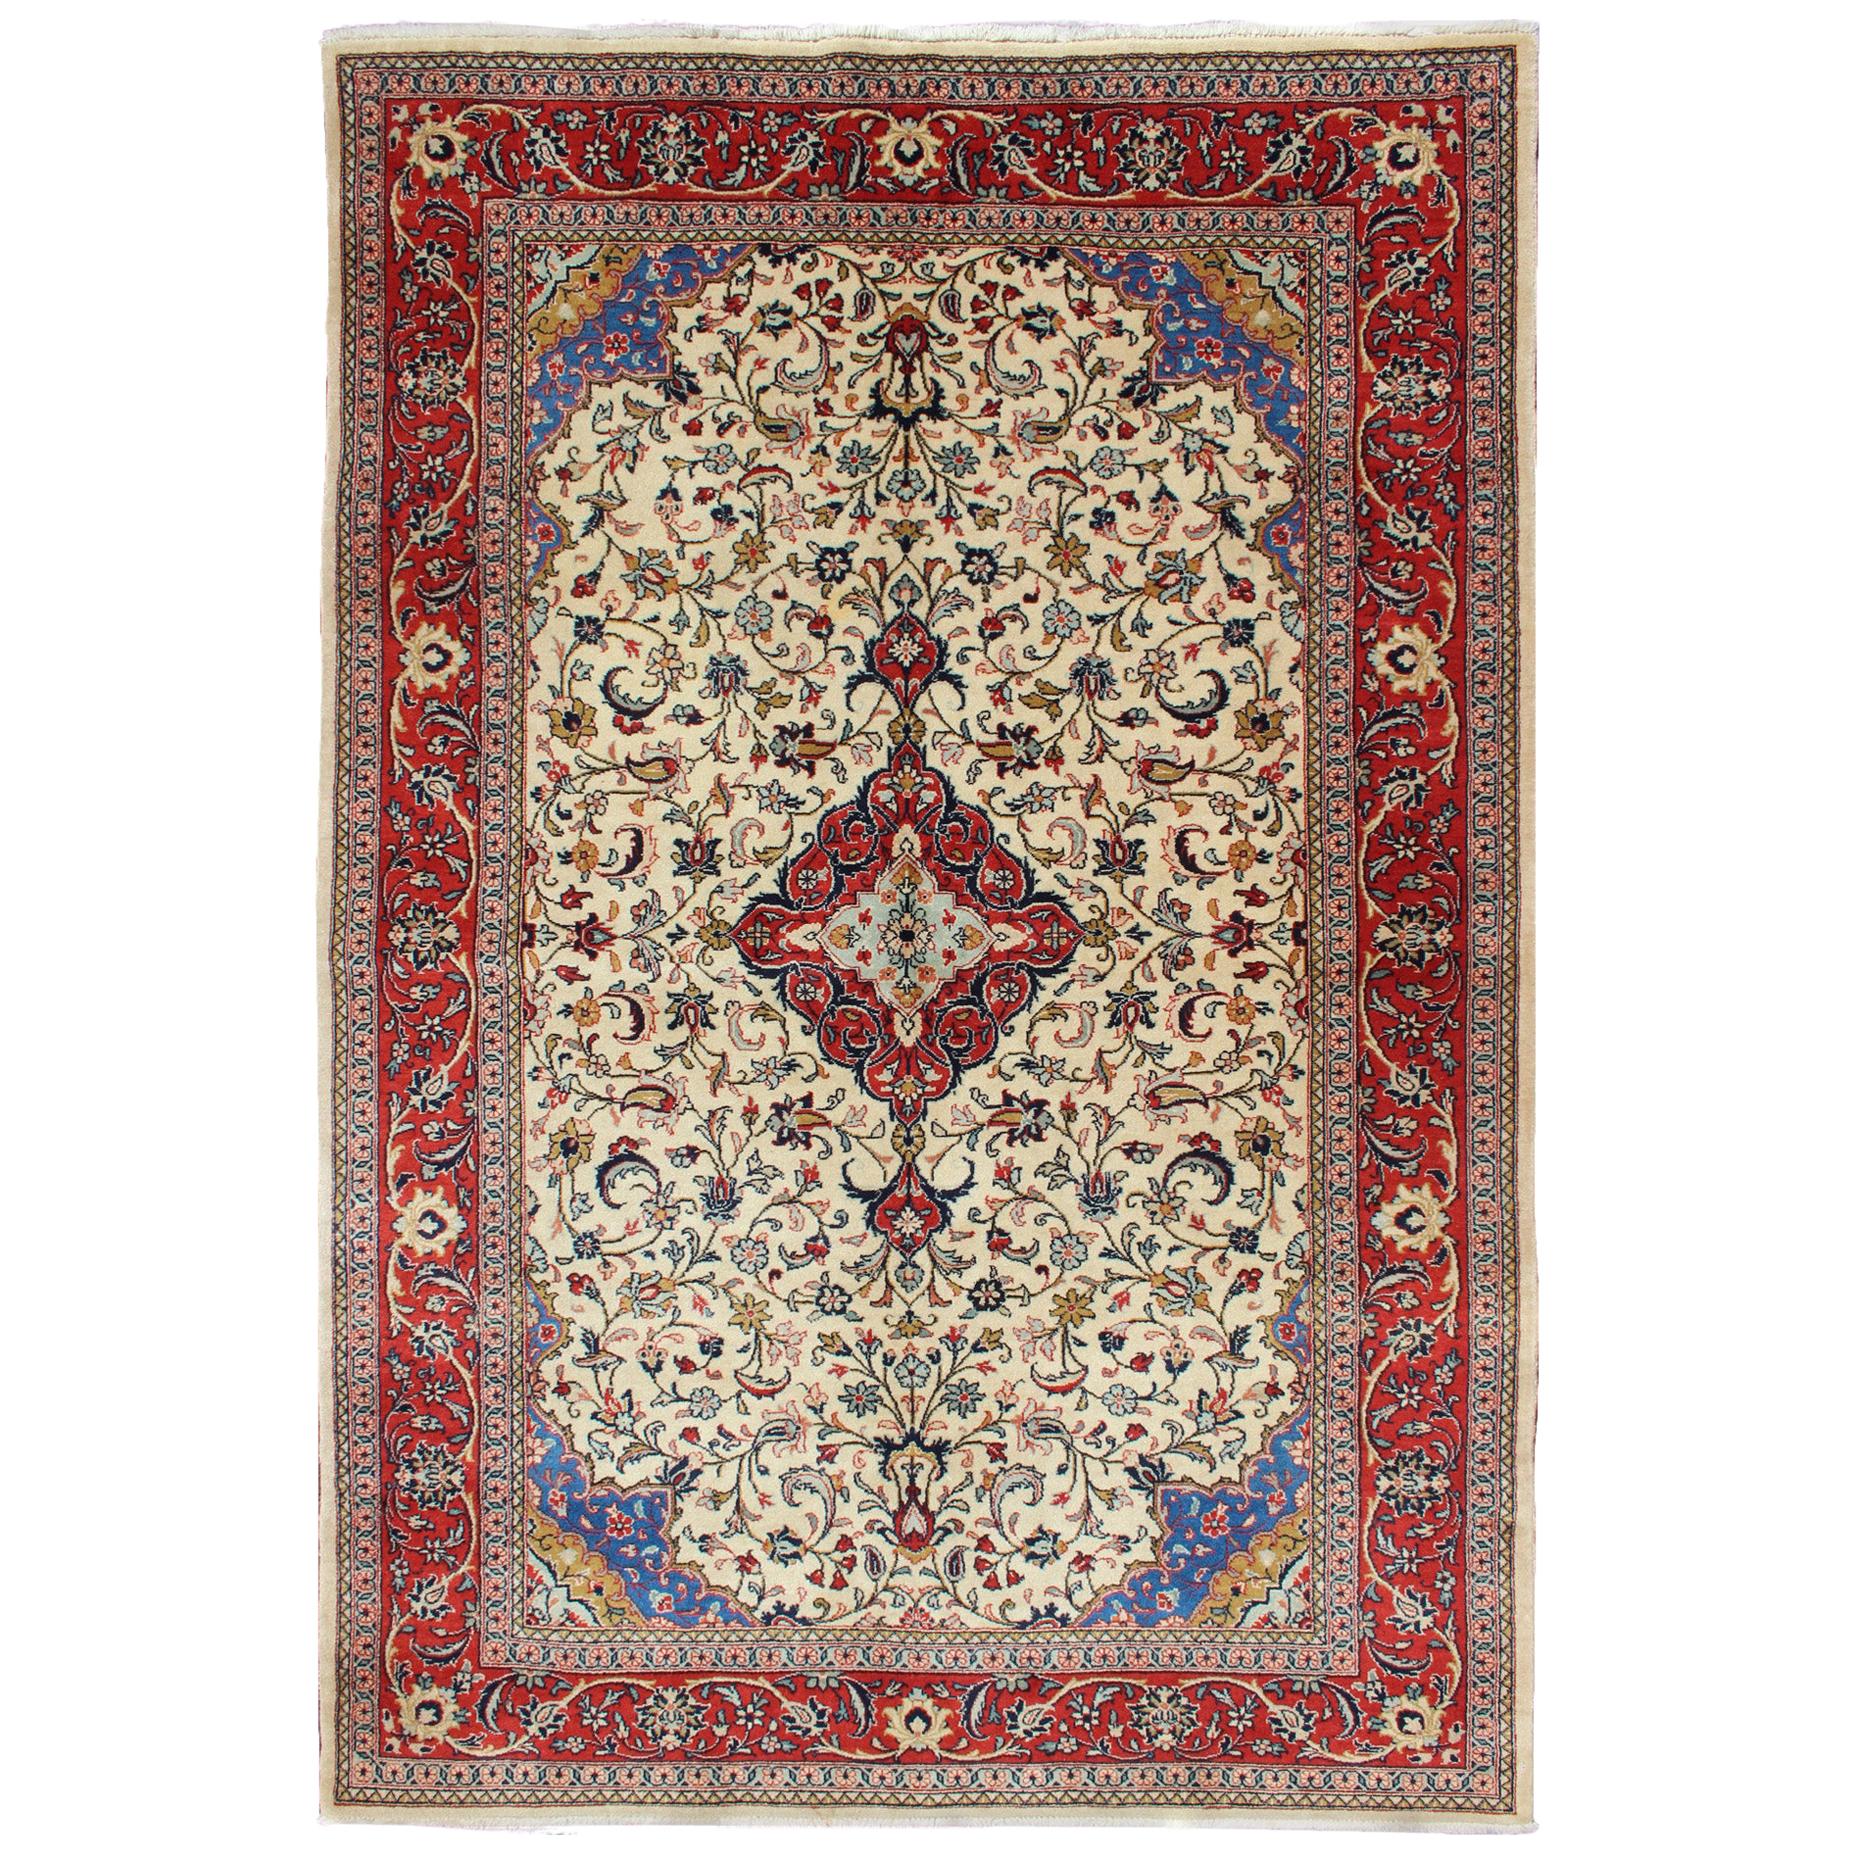 Vintage Persian Tabriz Rug with Floral Design in Cream, blue and Red